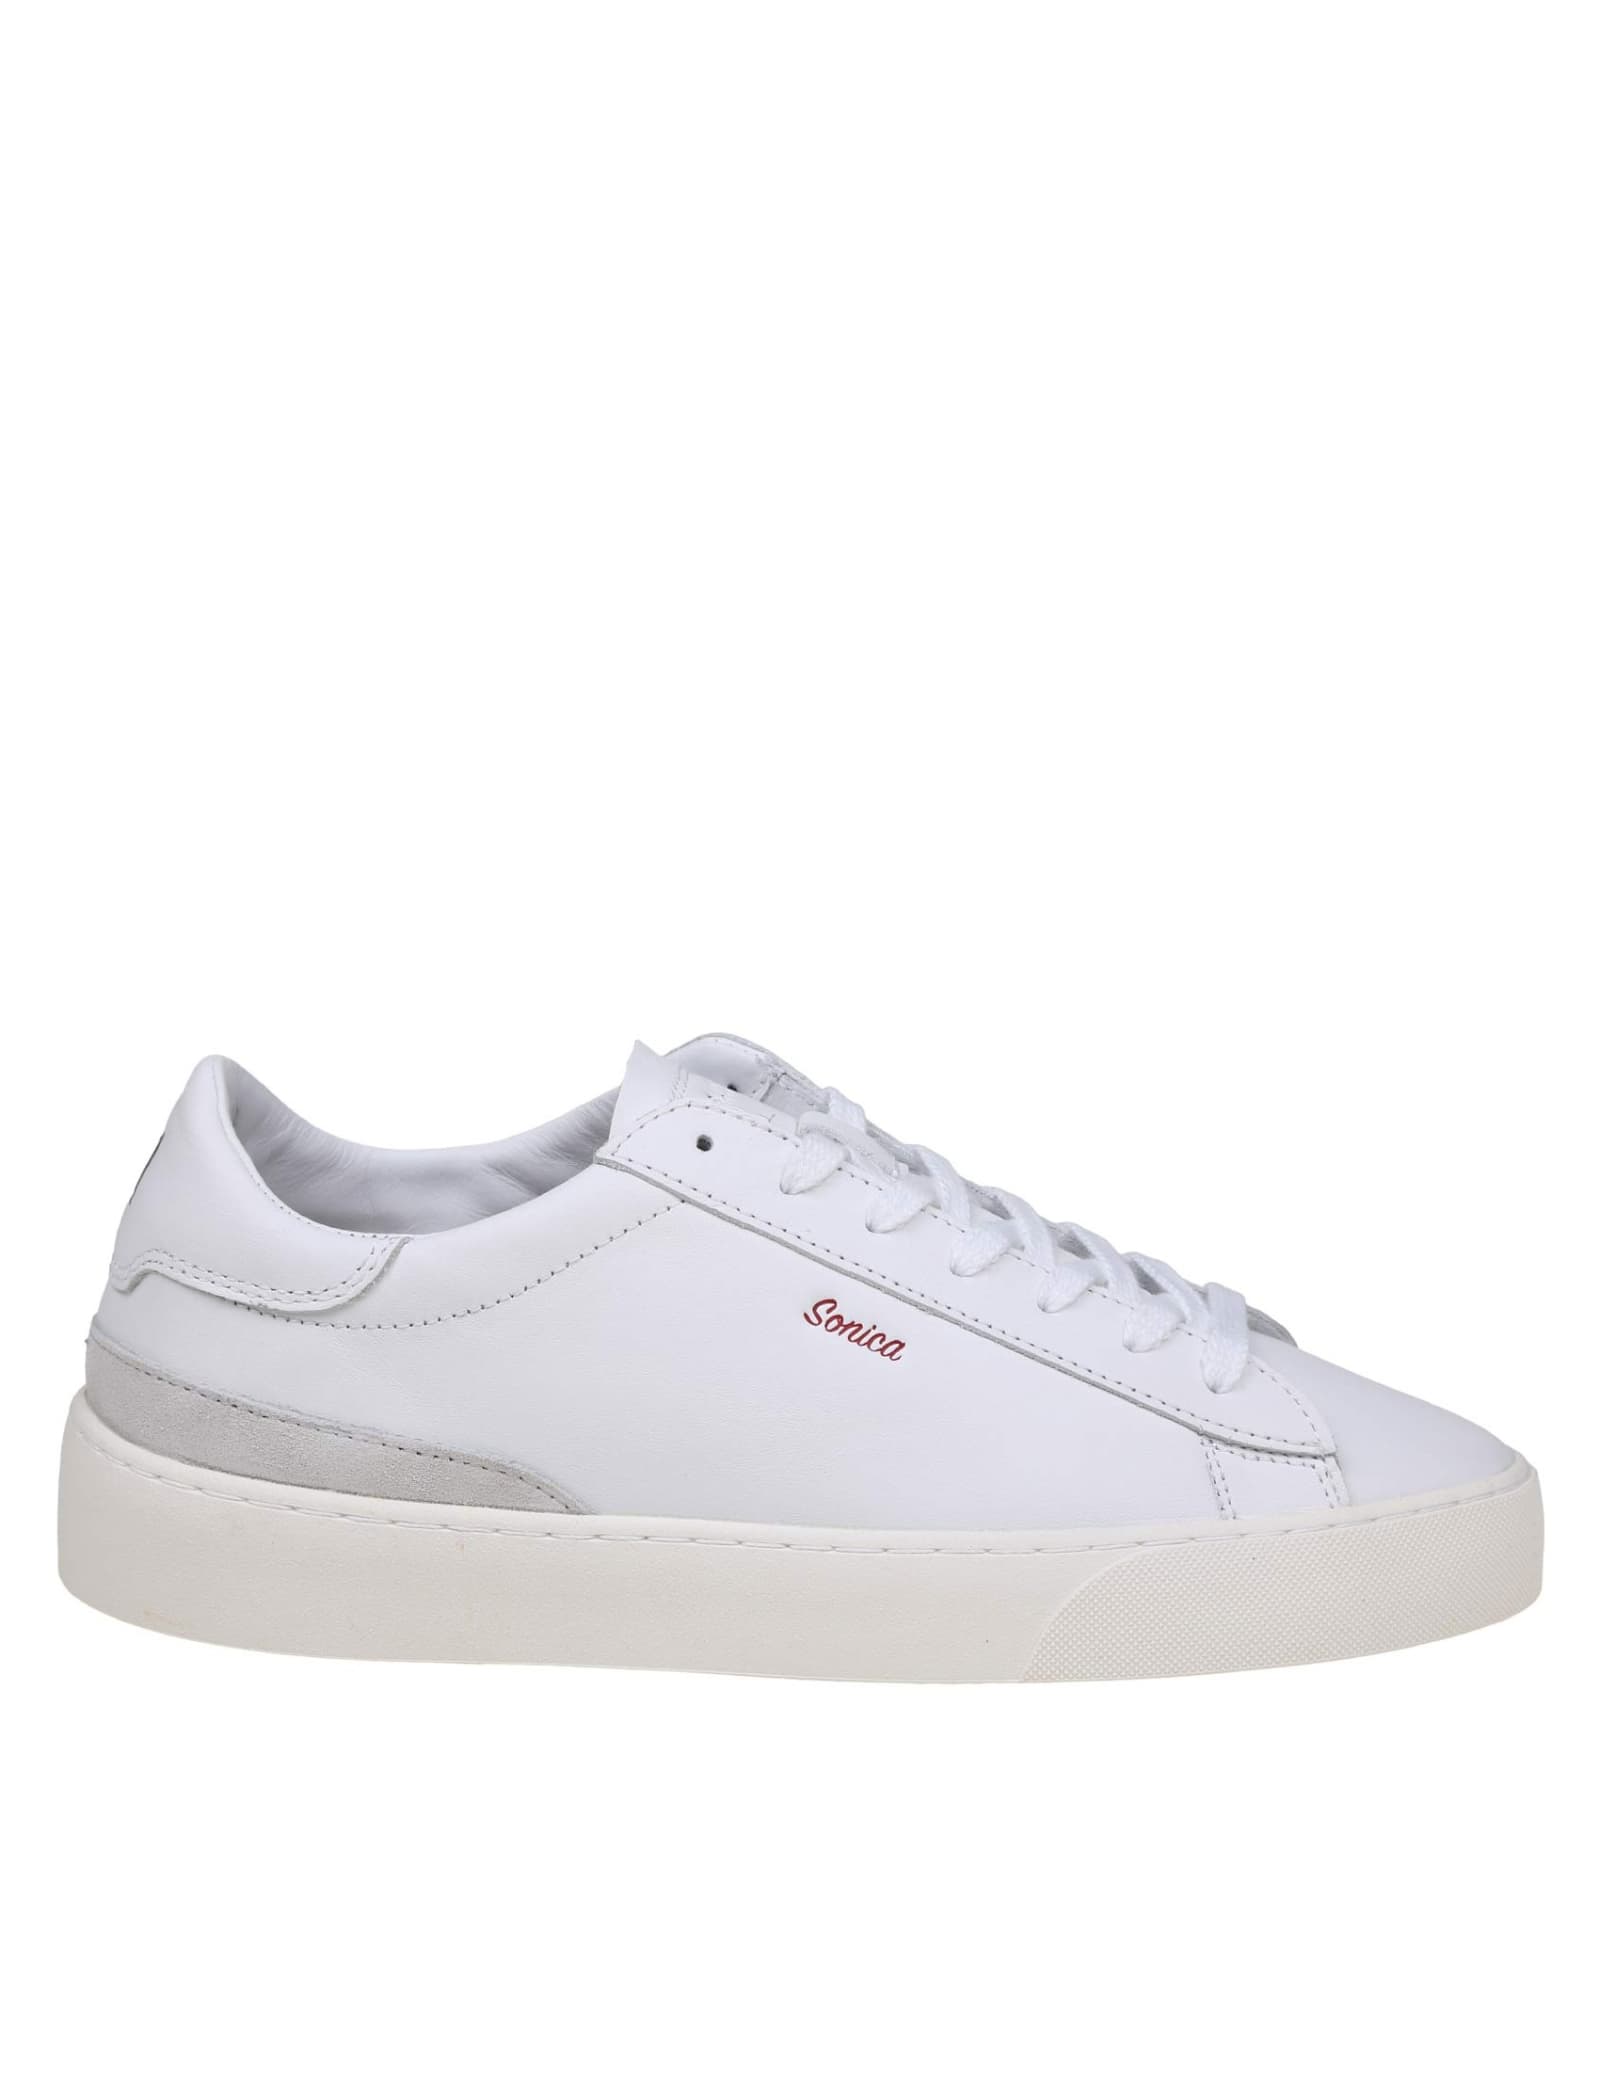 Shop Date Sonica Sneakers In White Leather And Suede